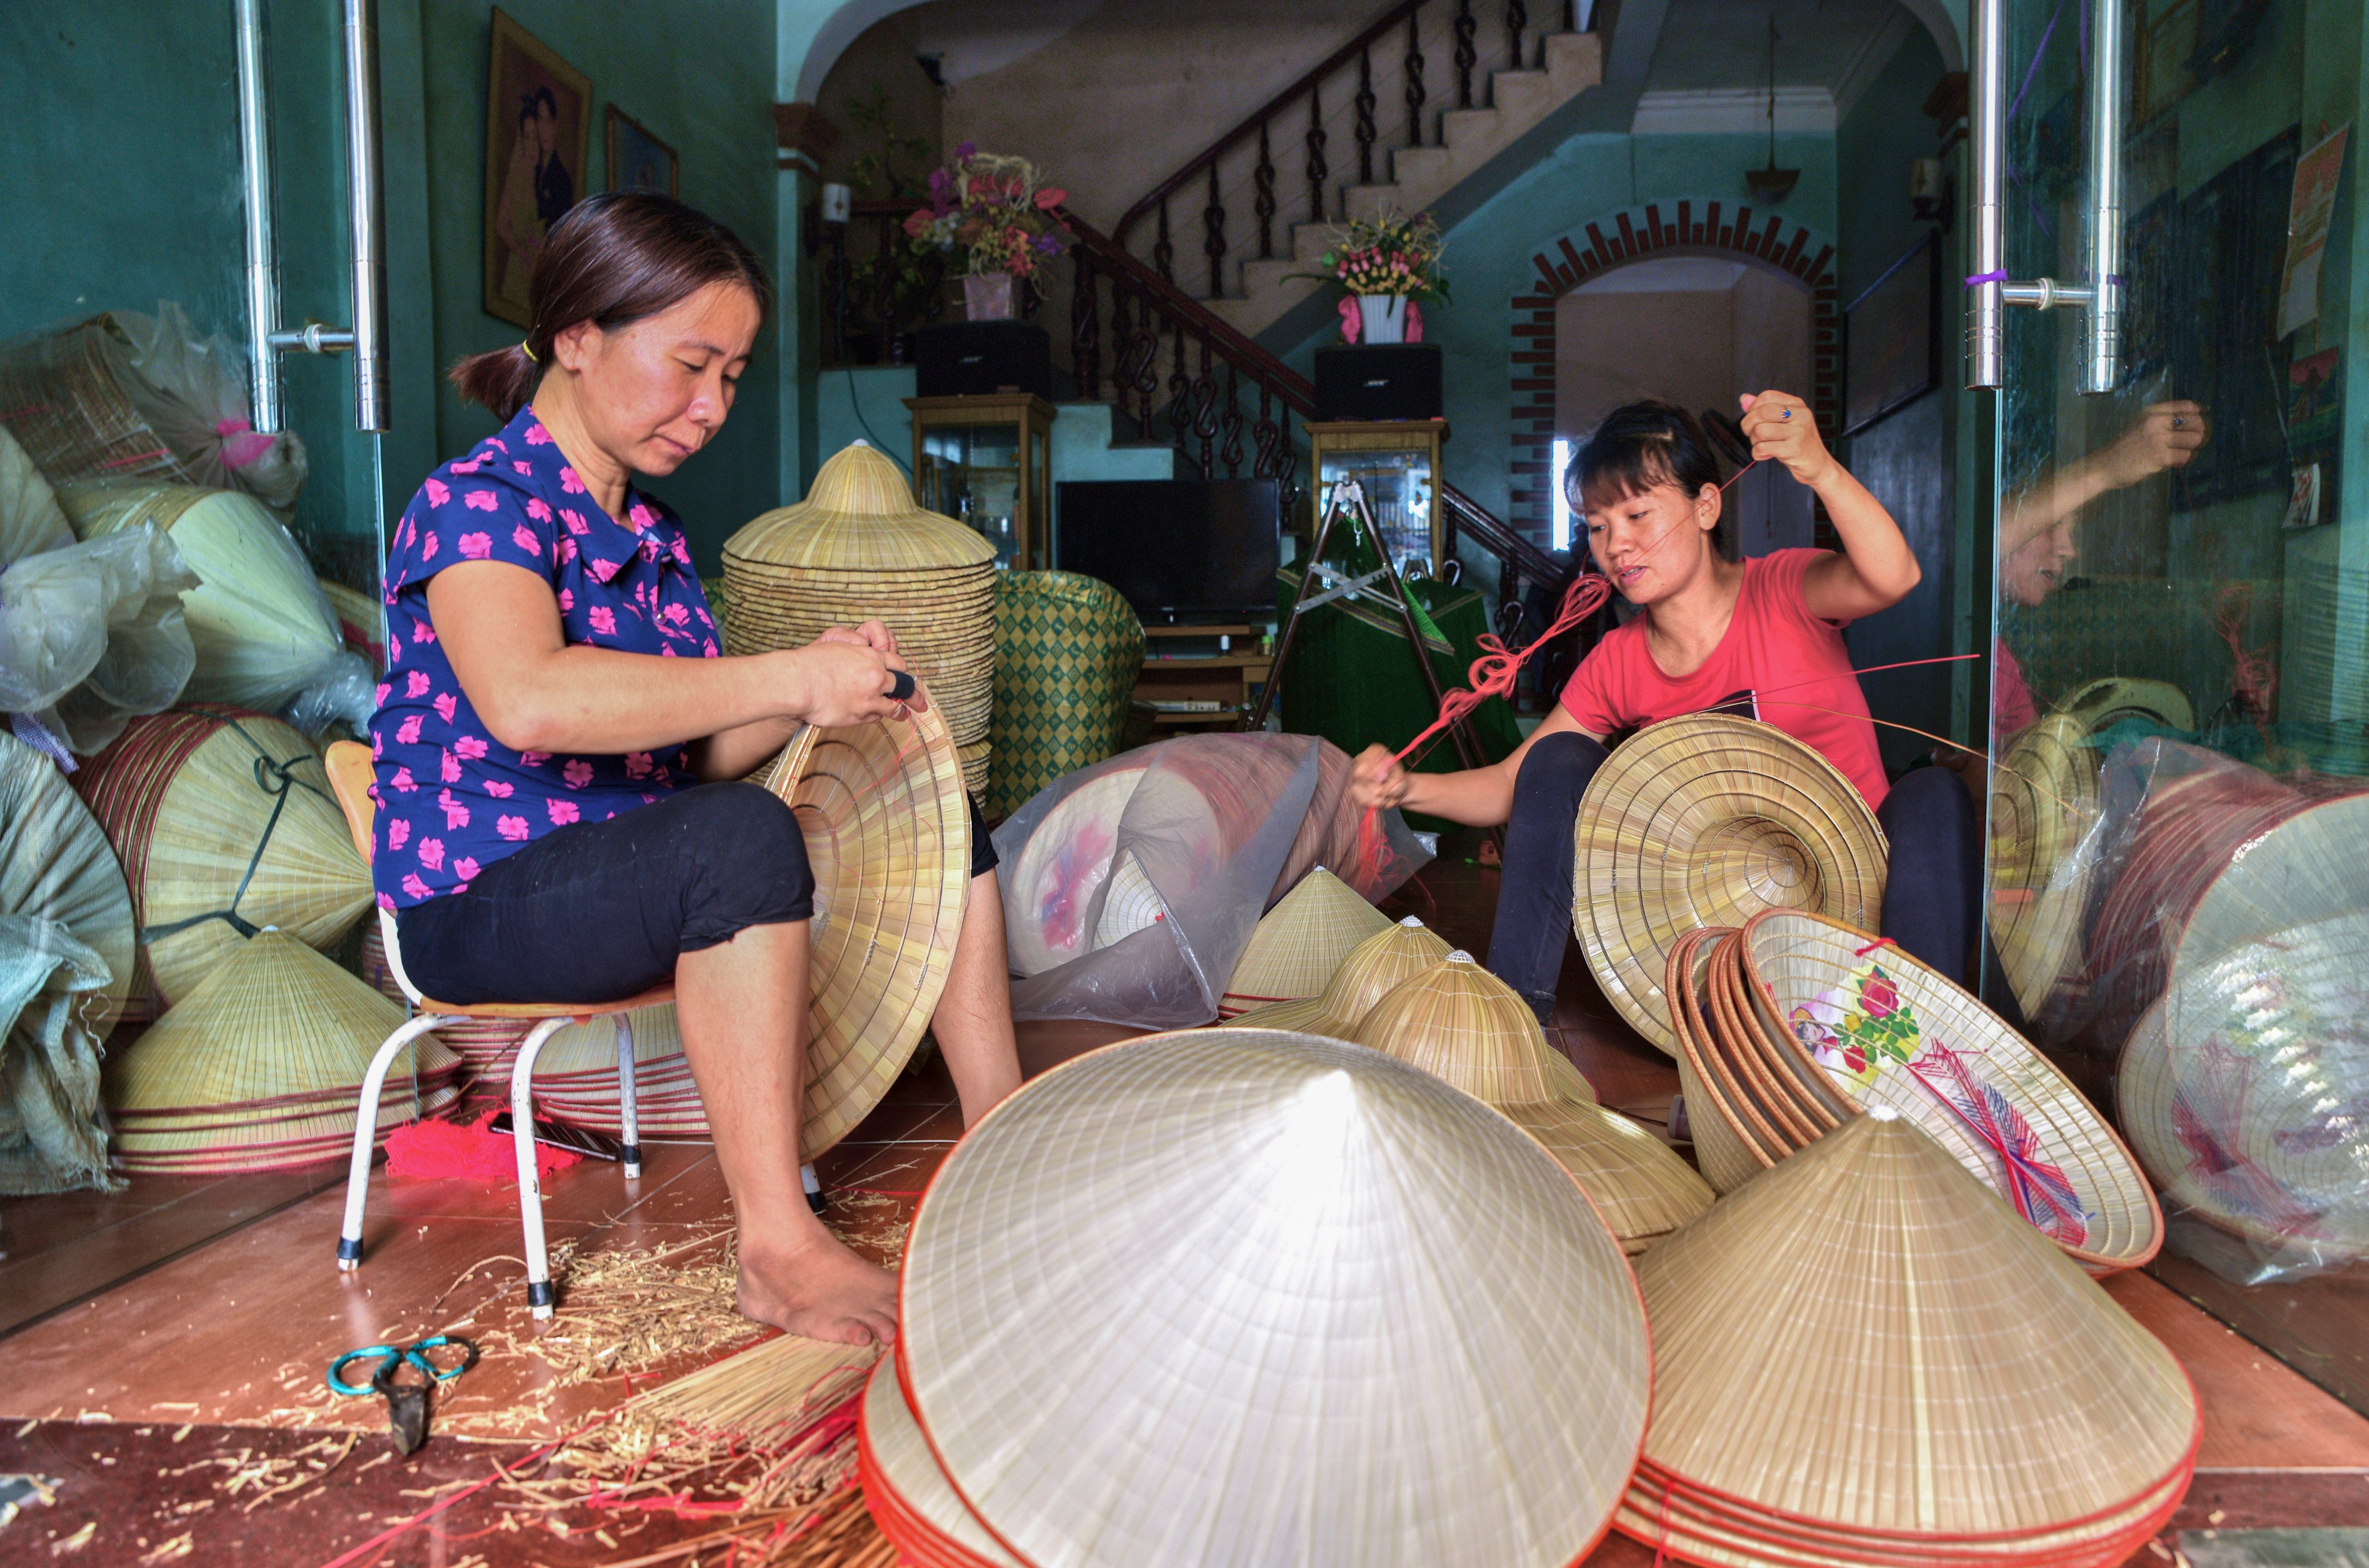 Artisans make conical hats in Chuong village, Hanoi, Vietnam. A dying trade because of cheaper factory-made hats, it could be revived by a new tourism strategy to promote the city’s craft villages. Photo: Ronan O’Connell